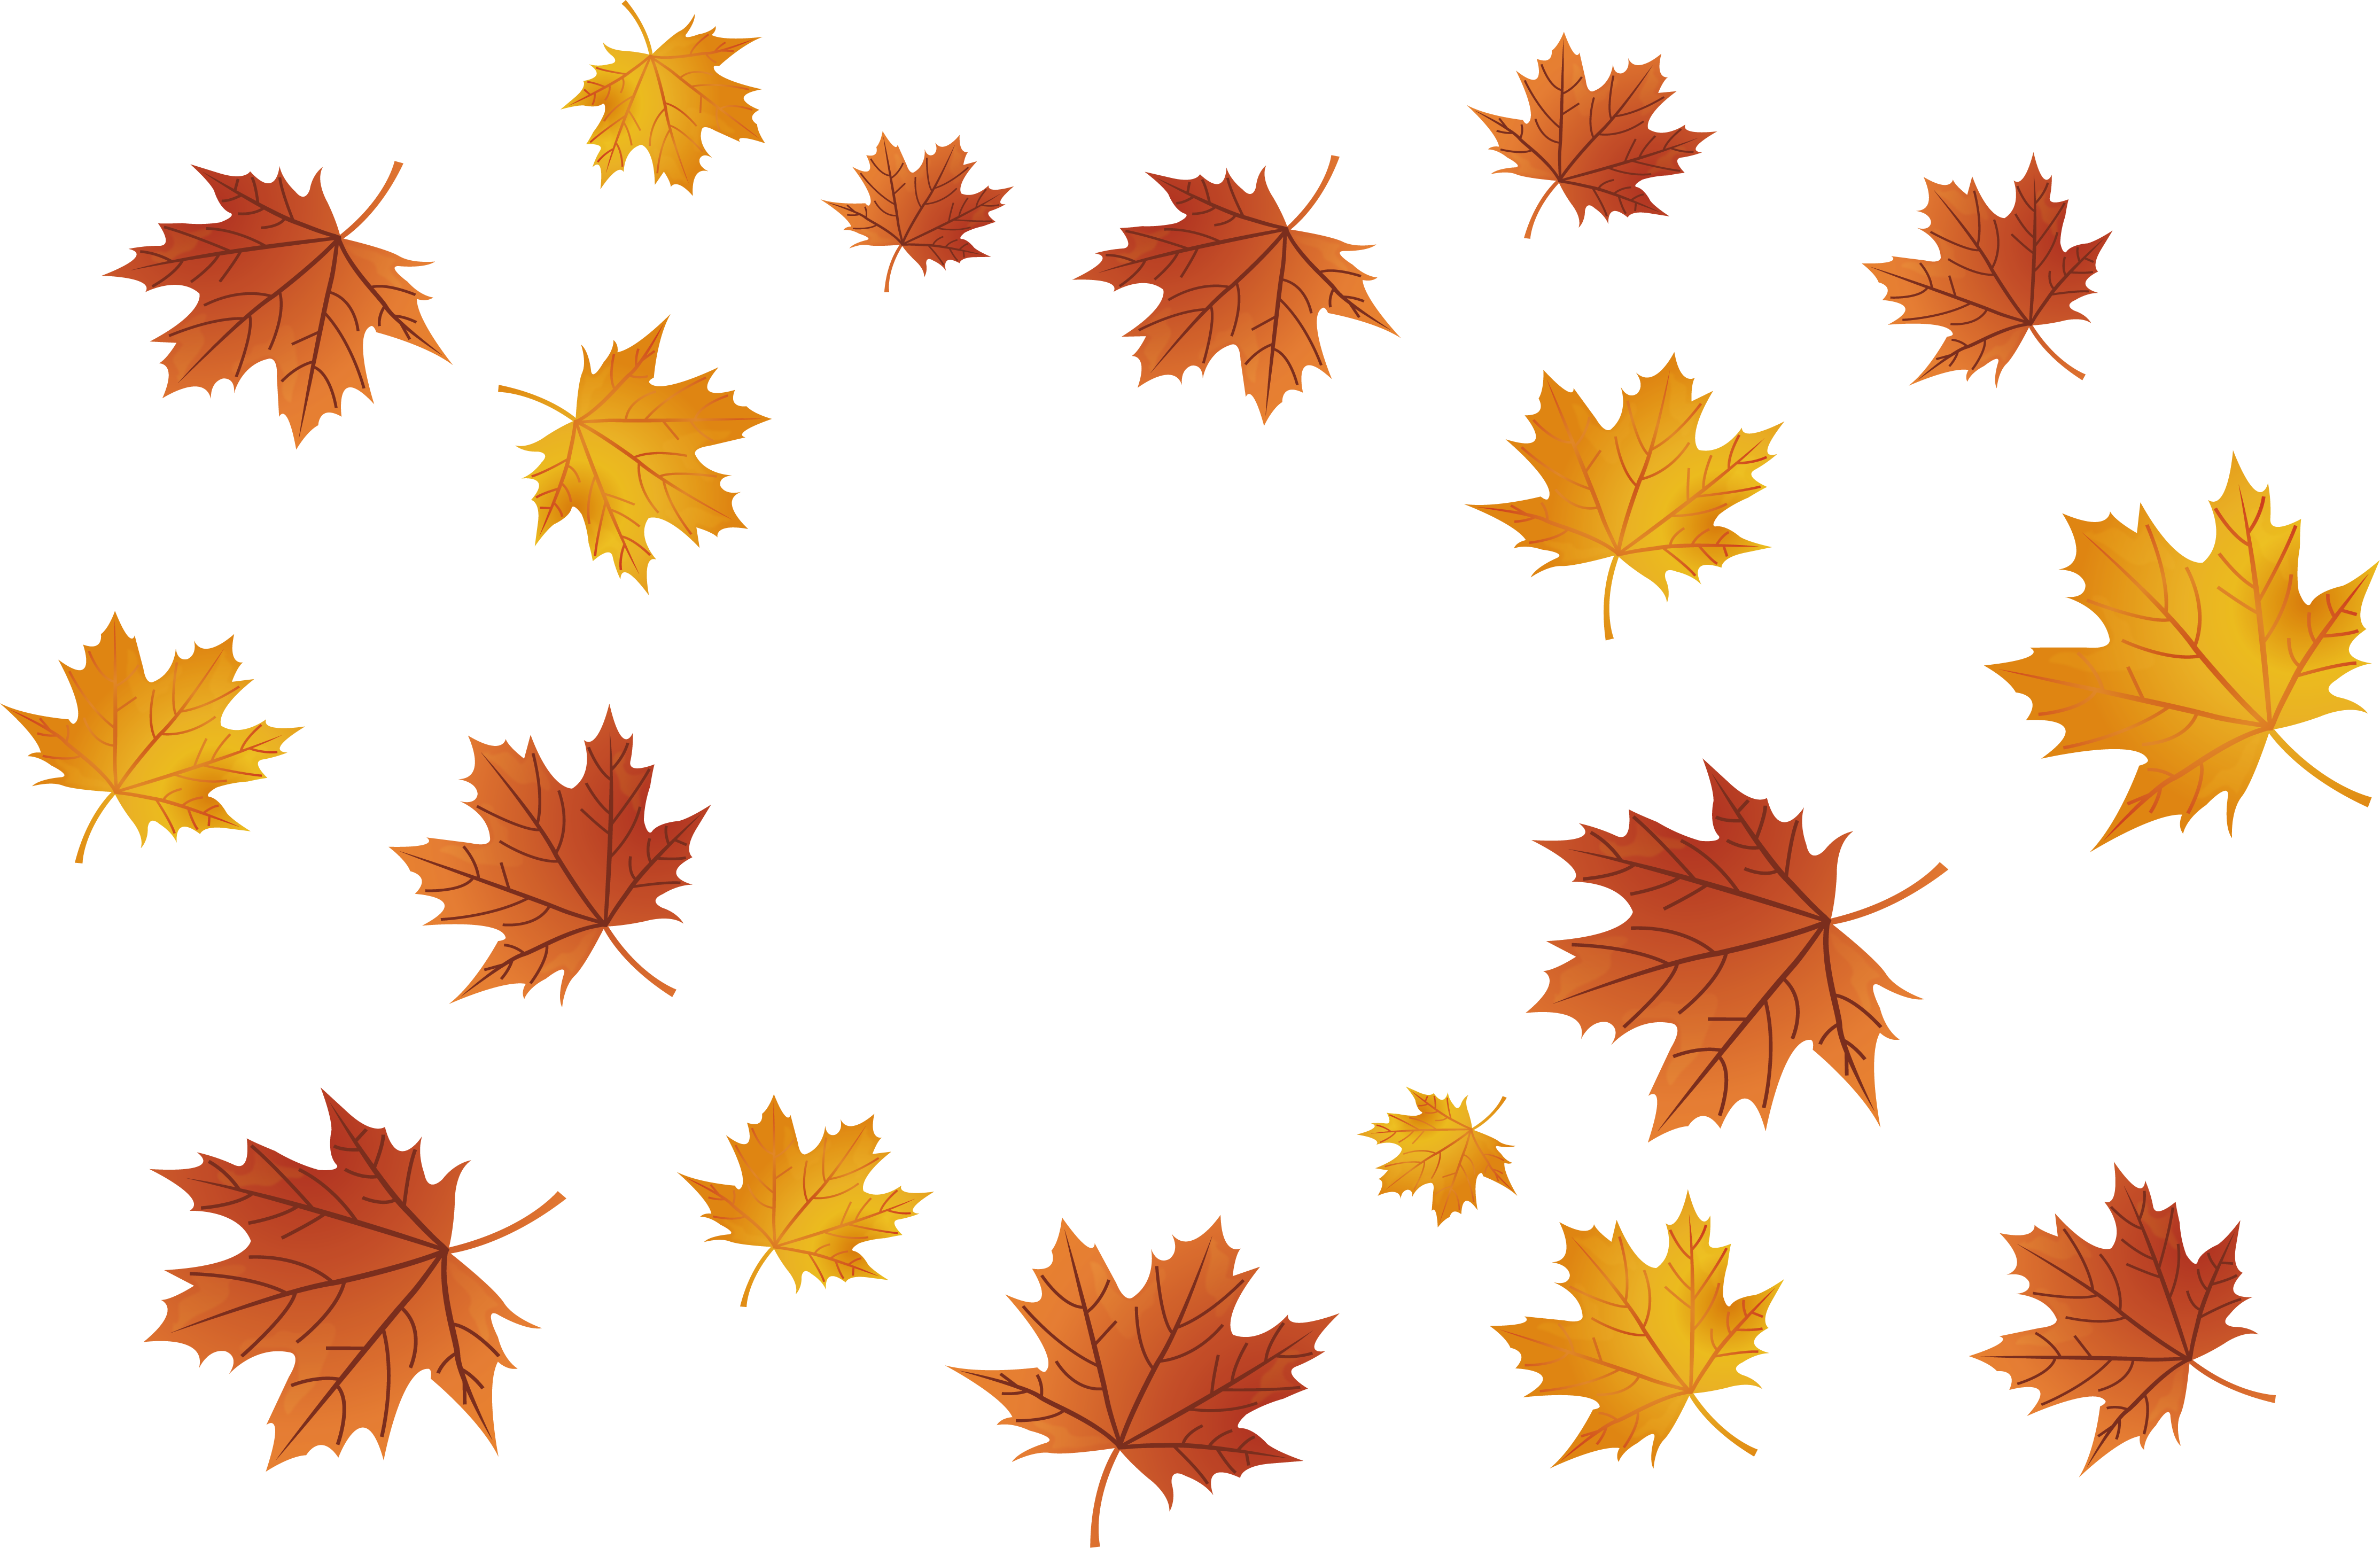 Maple leaf - Maple leaves falling png download - 4454*2897 - Free ...